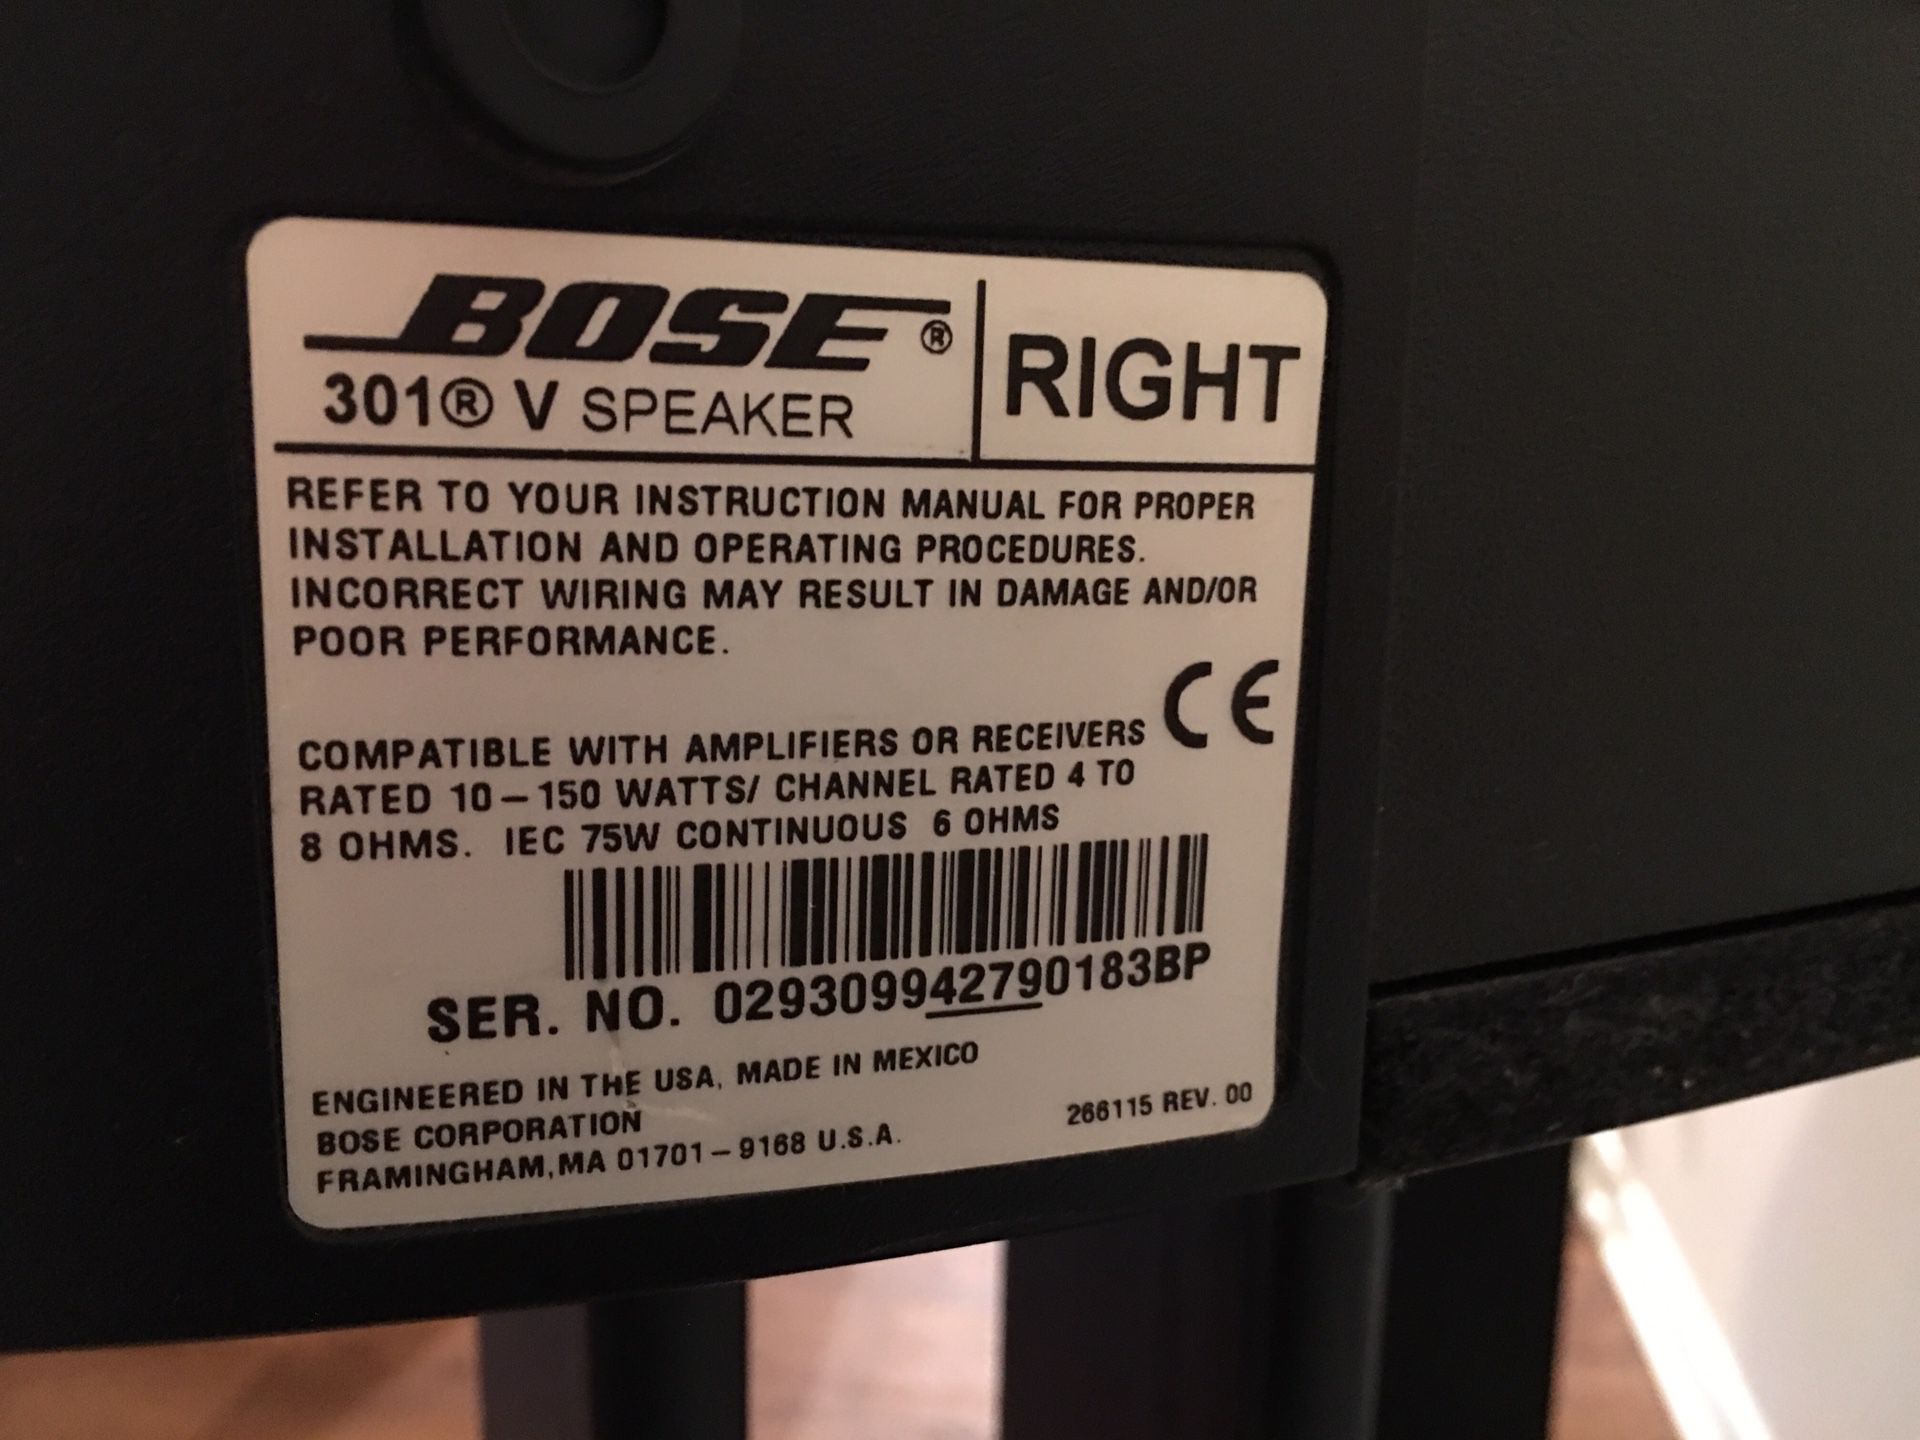 Bose 301 V speakers with stand